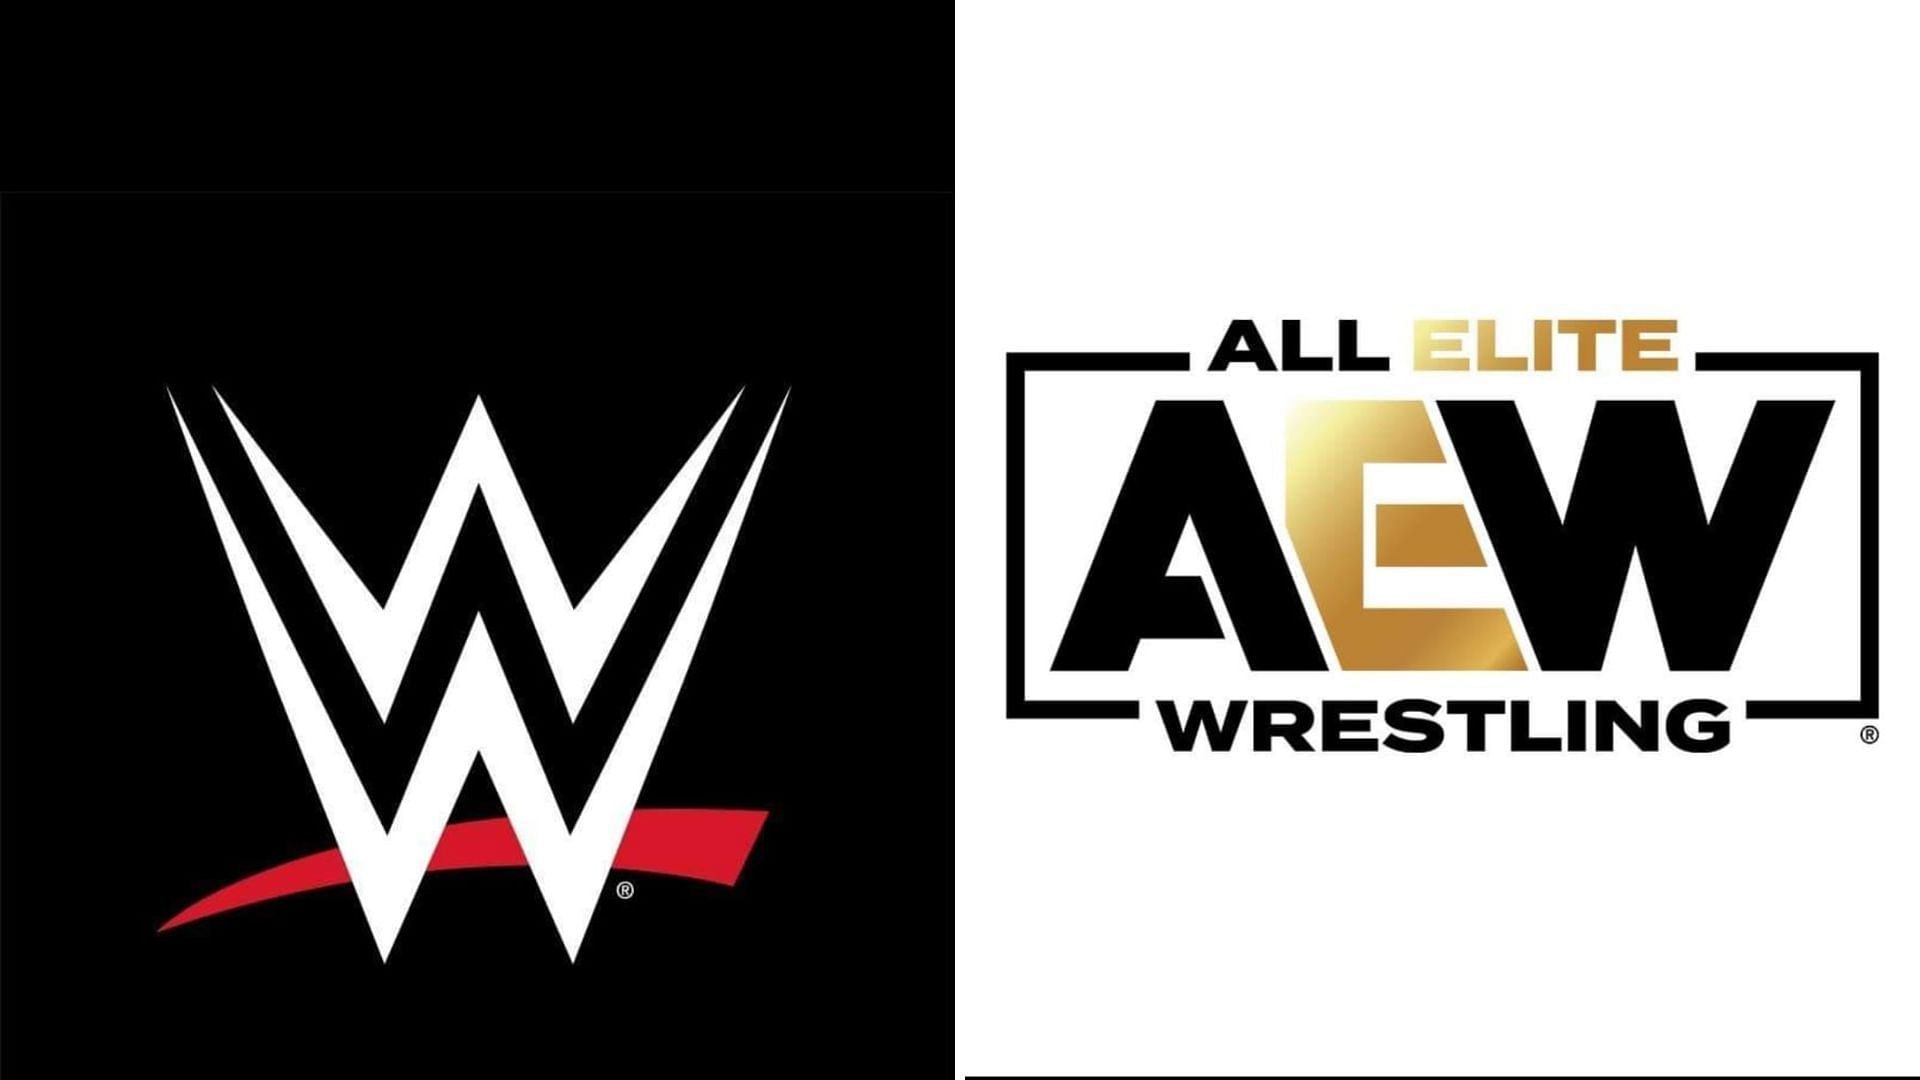 AEW and WWE are two of the biggest wrestling promotions.